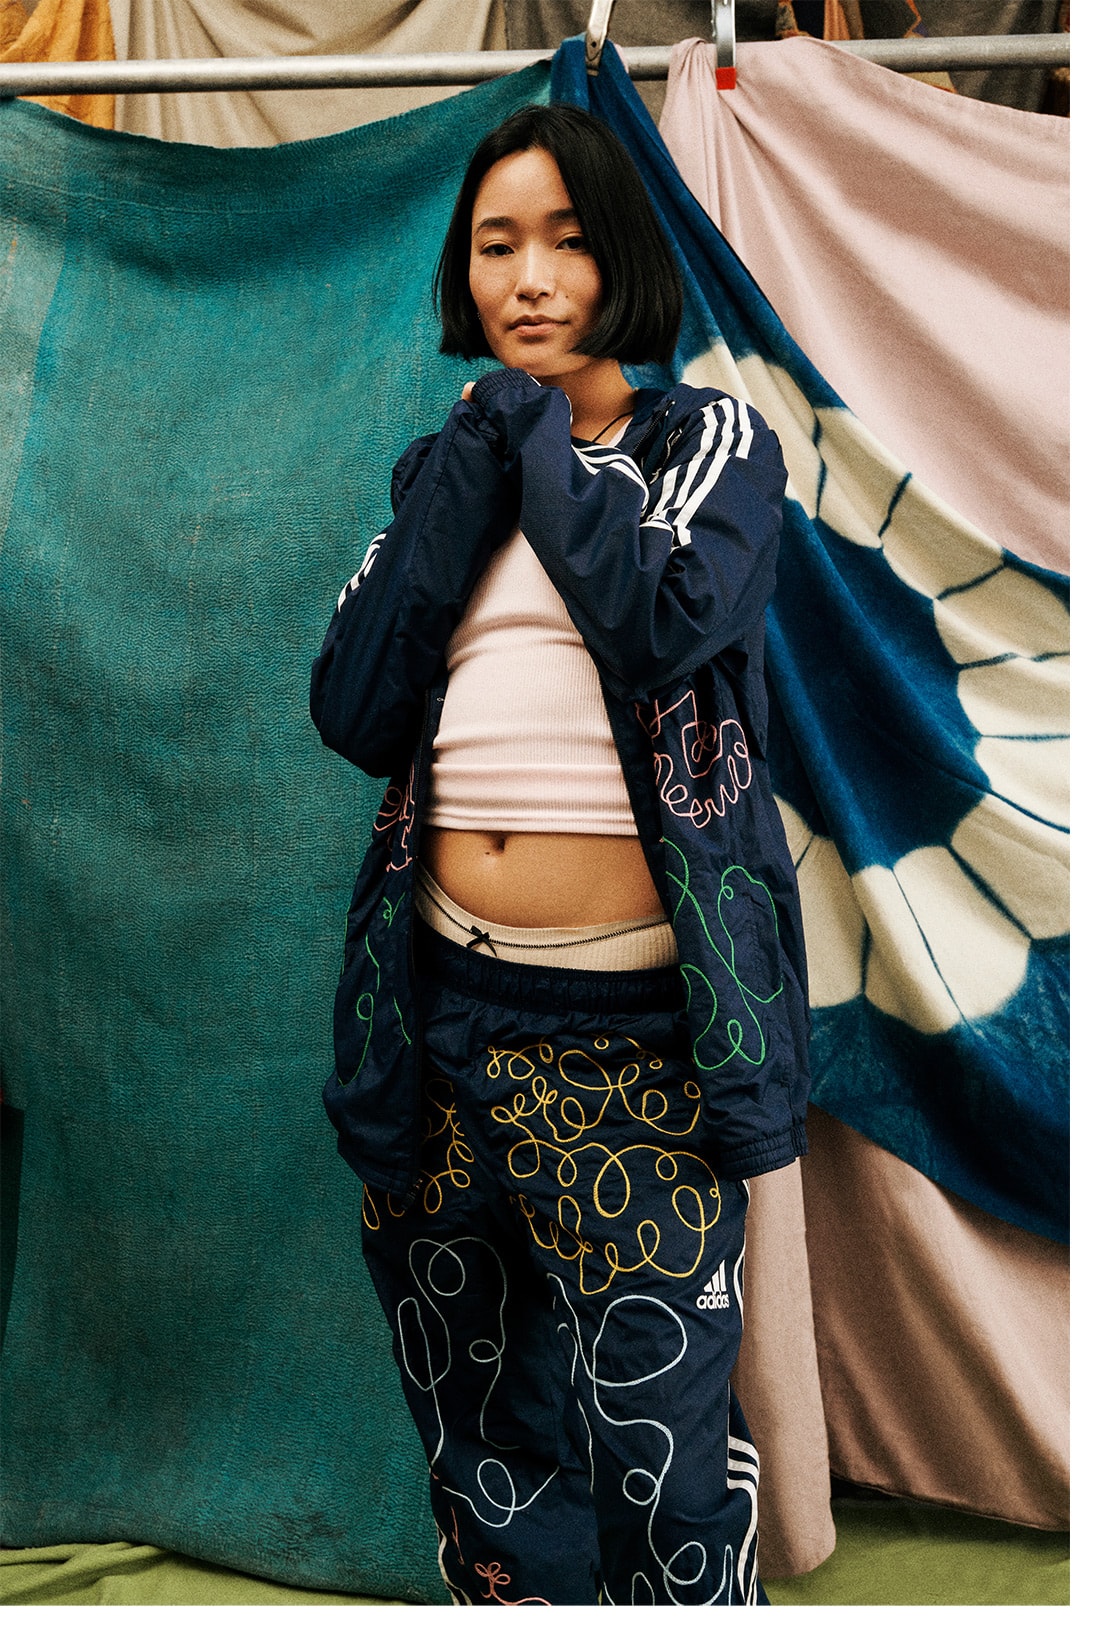 Adidas Upcycled Collections NYC Pop-Up Jacket Sustainability 